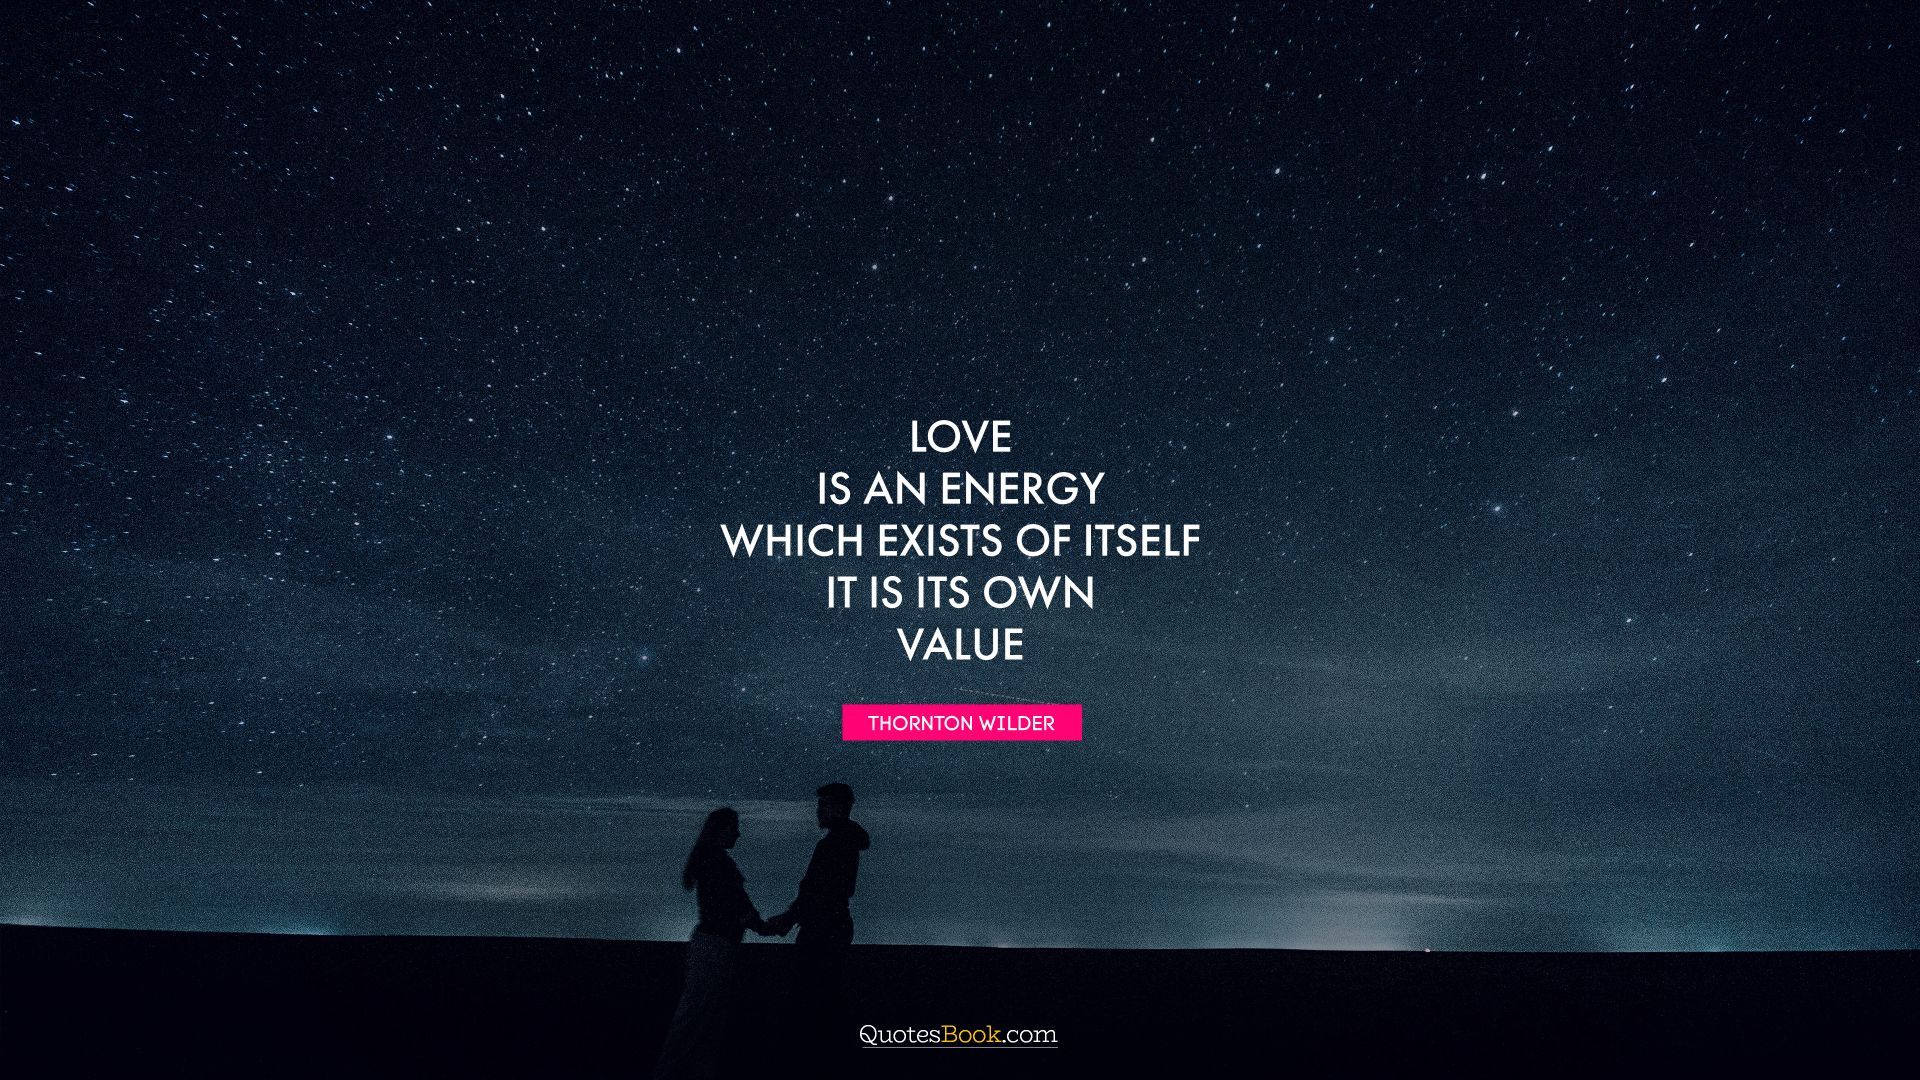 Love is an energy which exists of itself. It is its own value. - Quote by Thornton Wilder